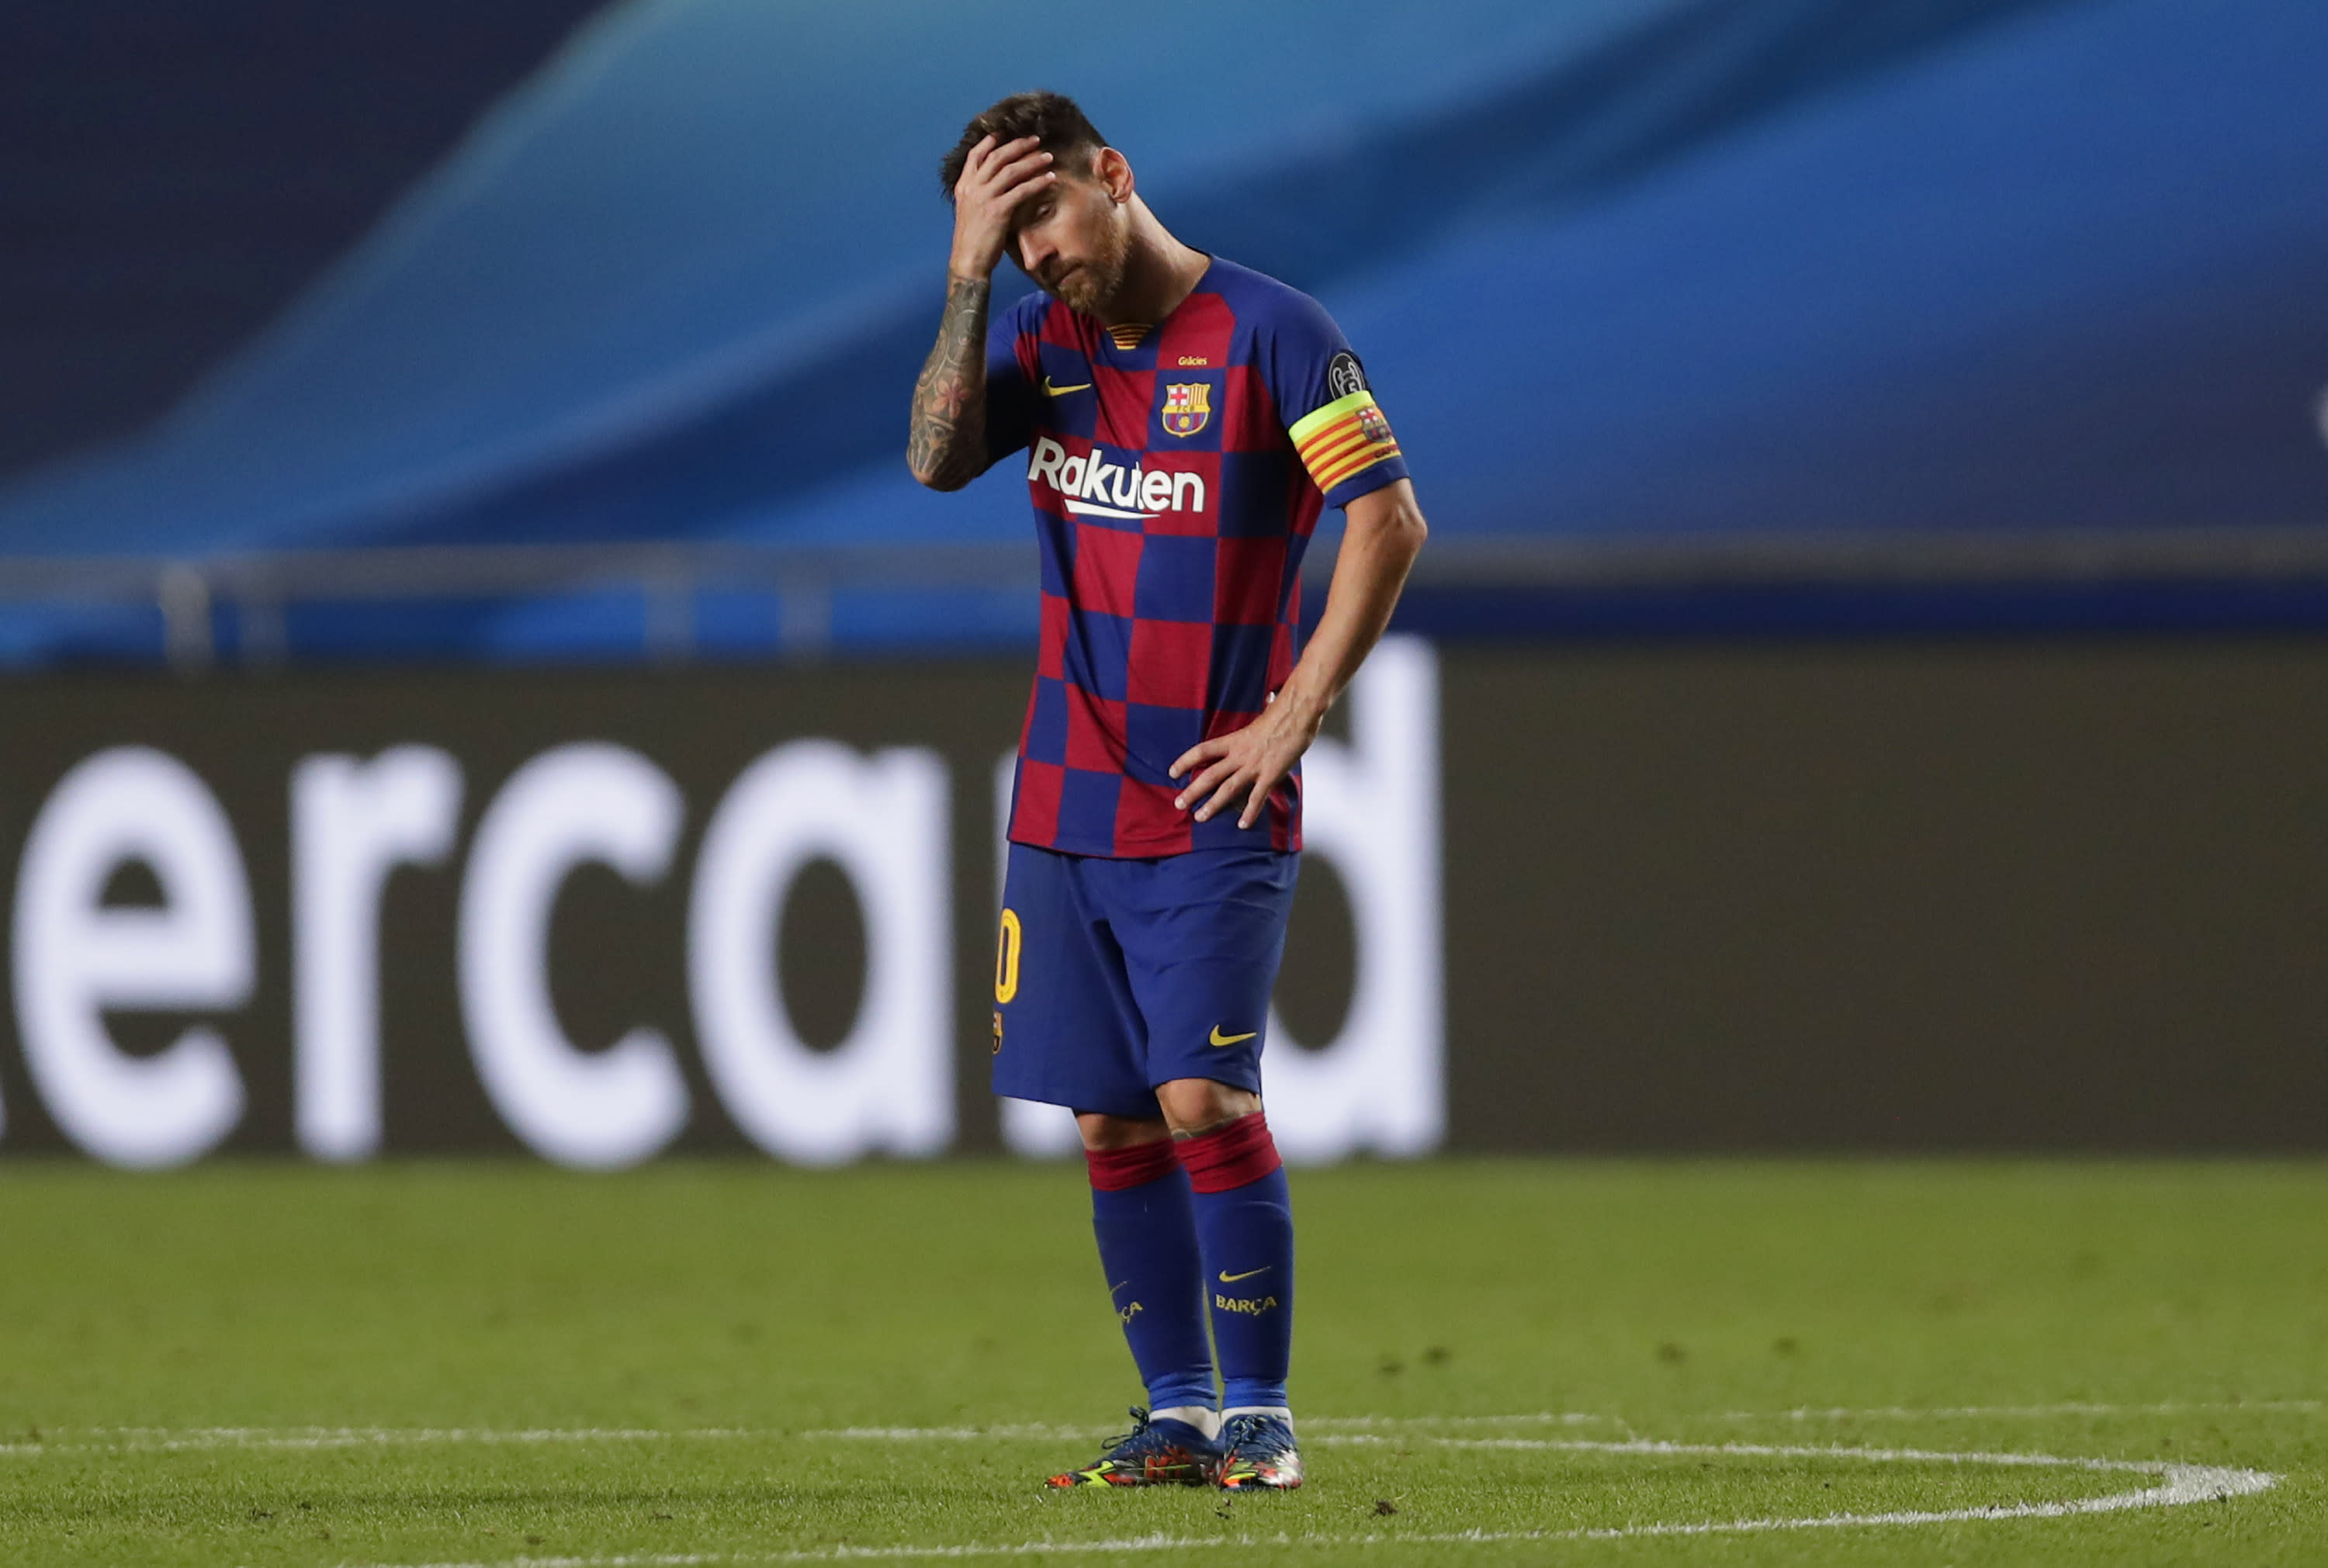 Champions League Bayern Munich Humiliates Barcelona Is This The End Of The Lionel Messi Era Video